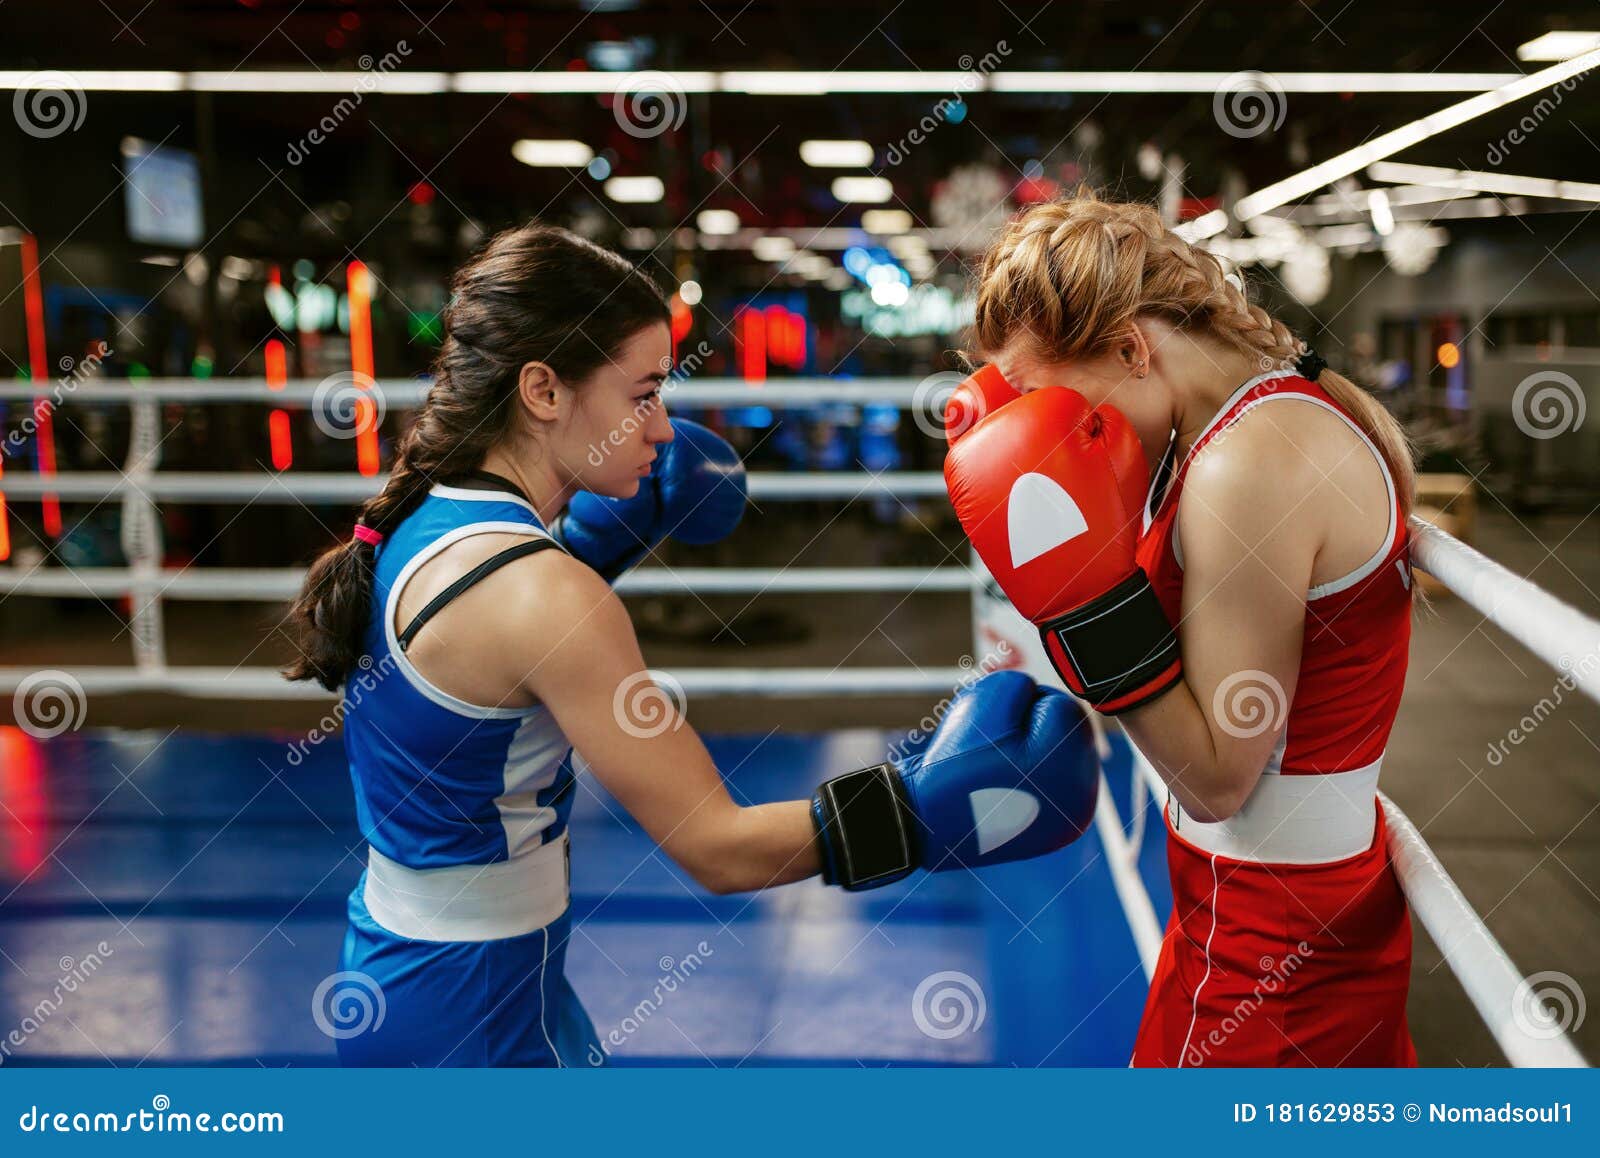 Women In Red And Blue Gloves Boxing On The Ring Stock Image Image Of Kickboxing Fight 181629853 